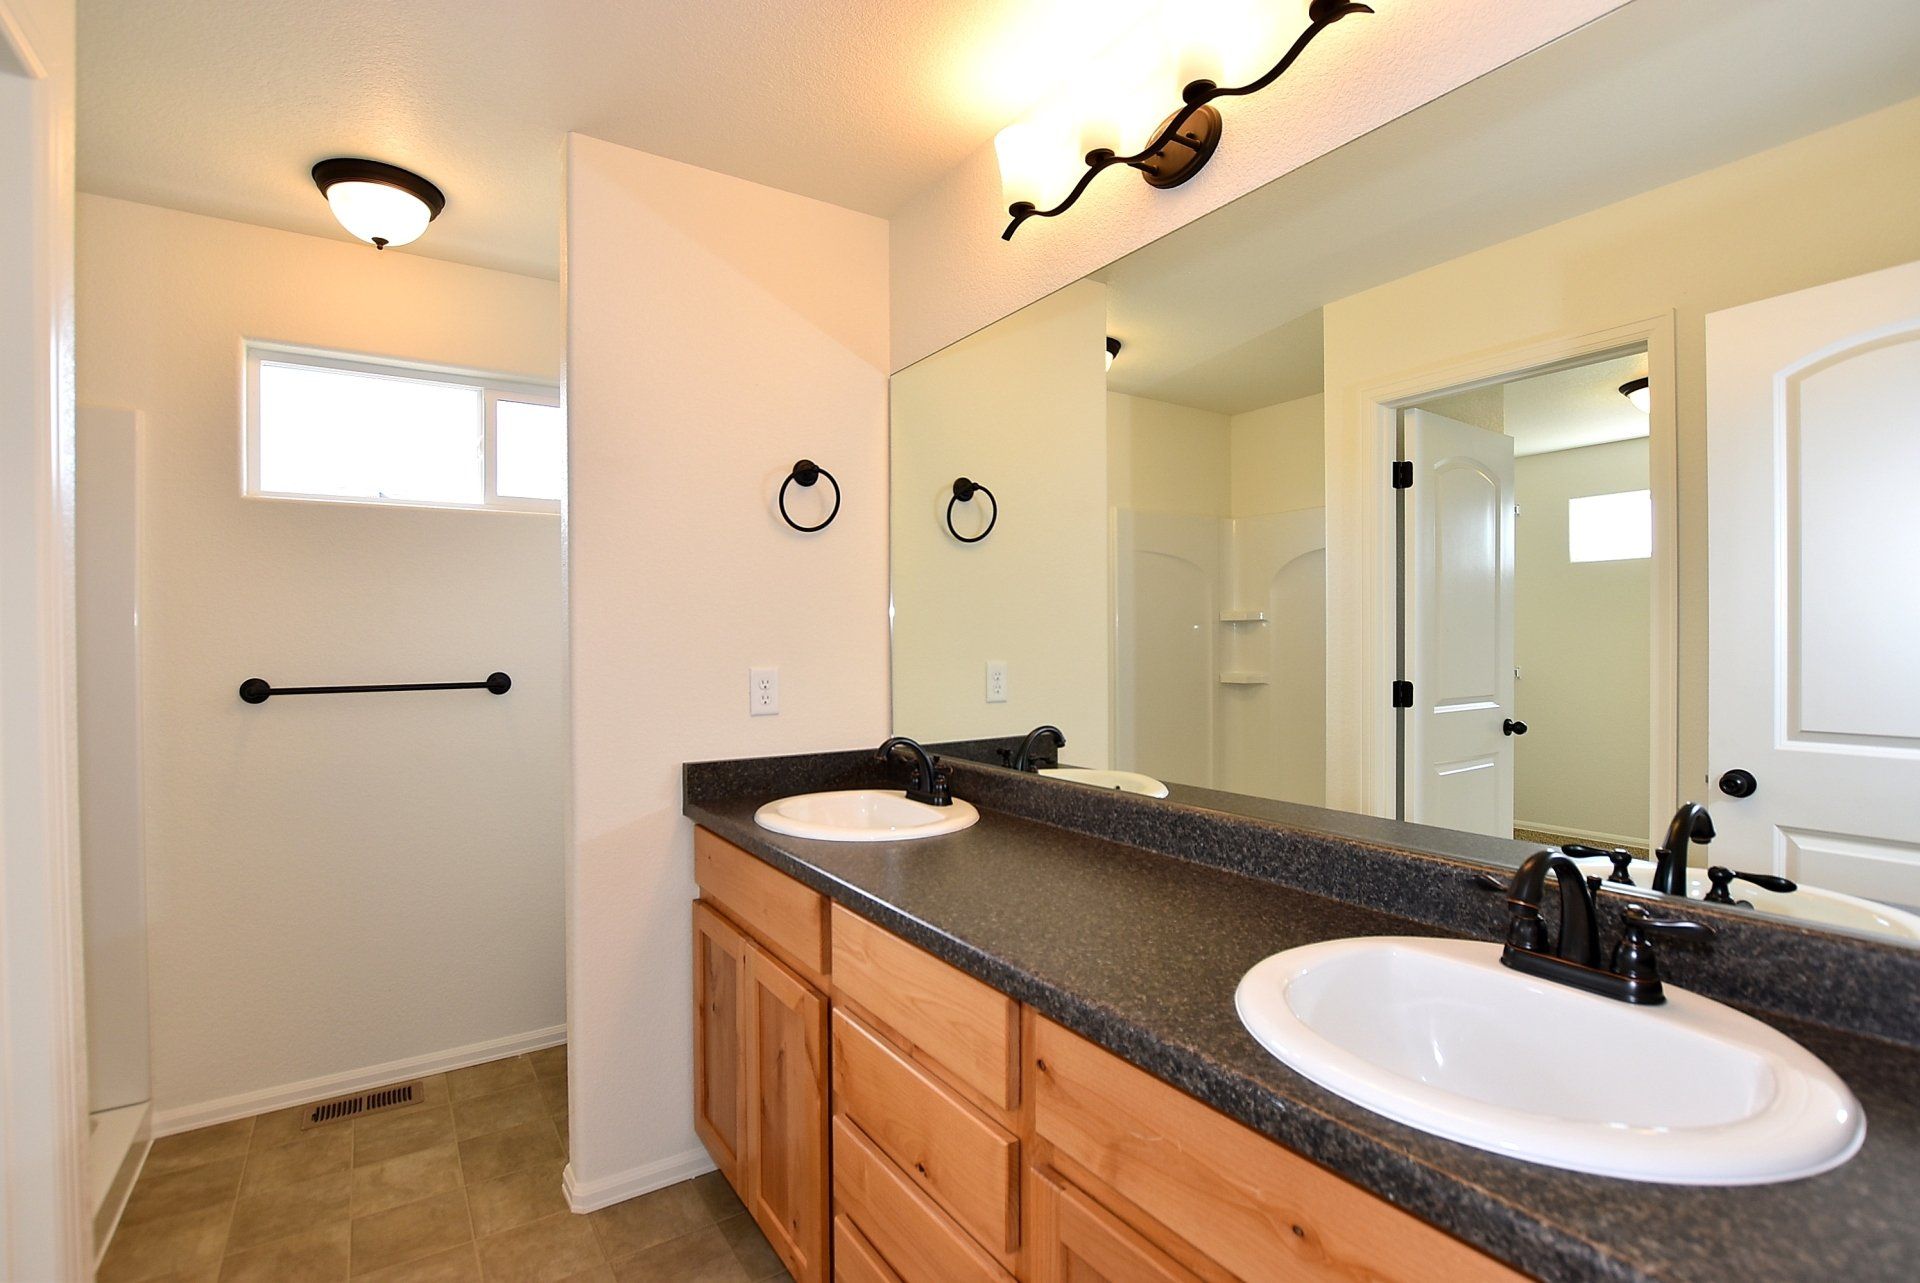 Bathroom with countertops and sinks